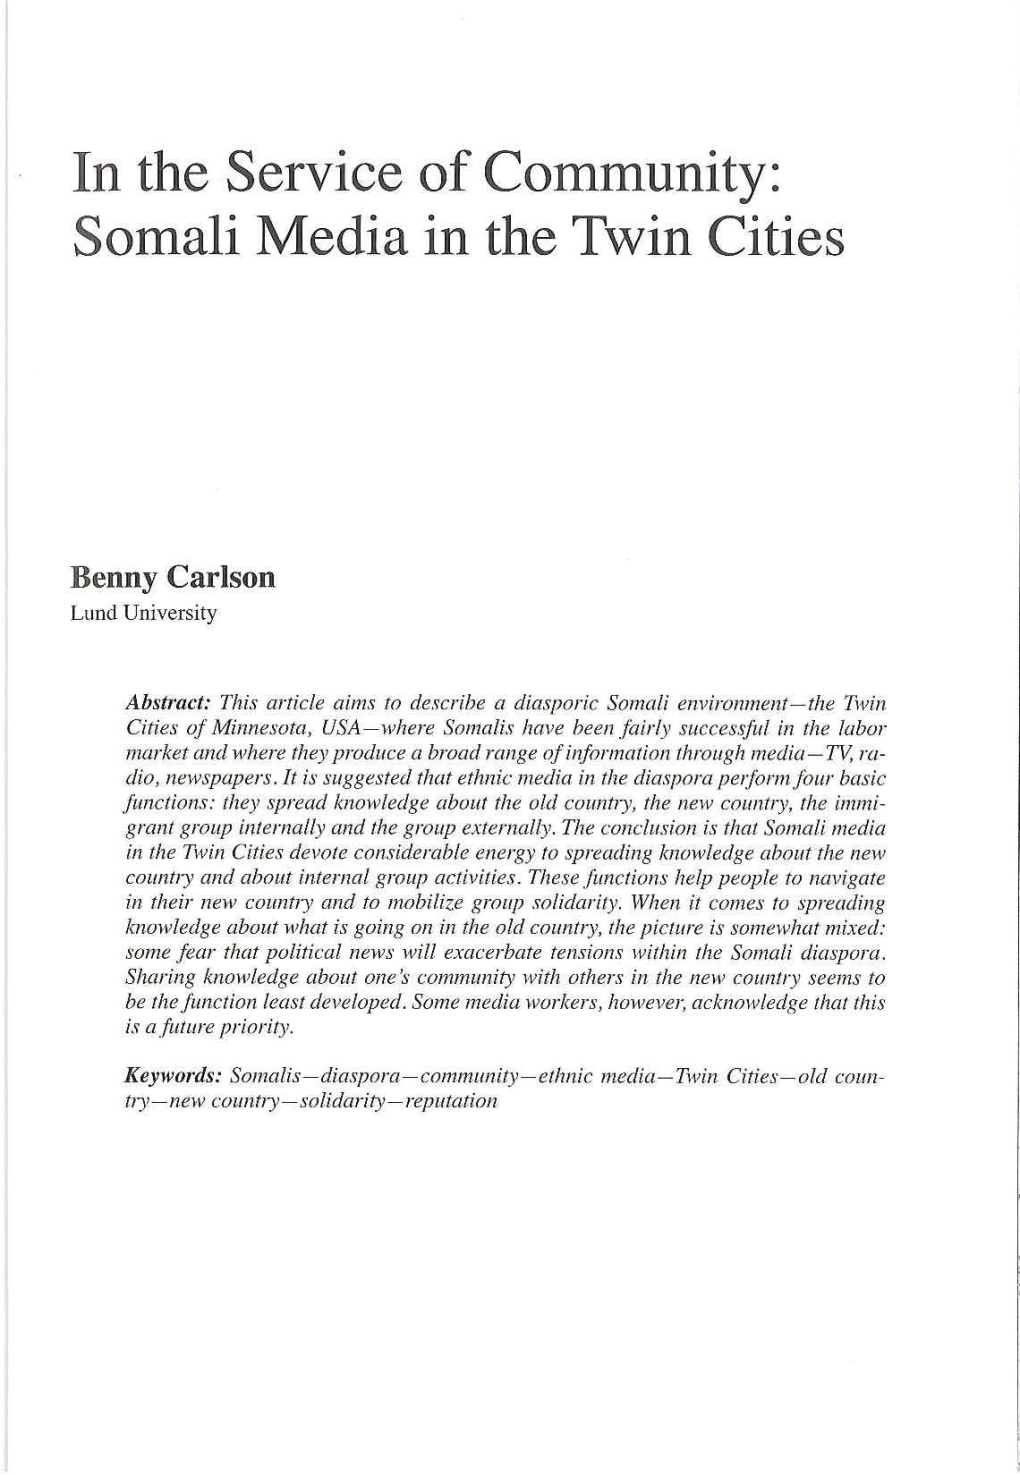 Somali Media in the Twin Cities